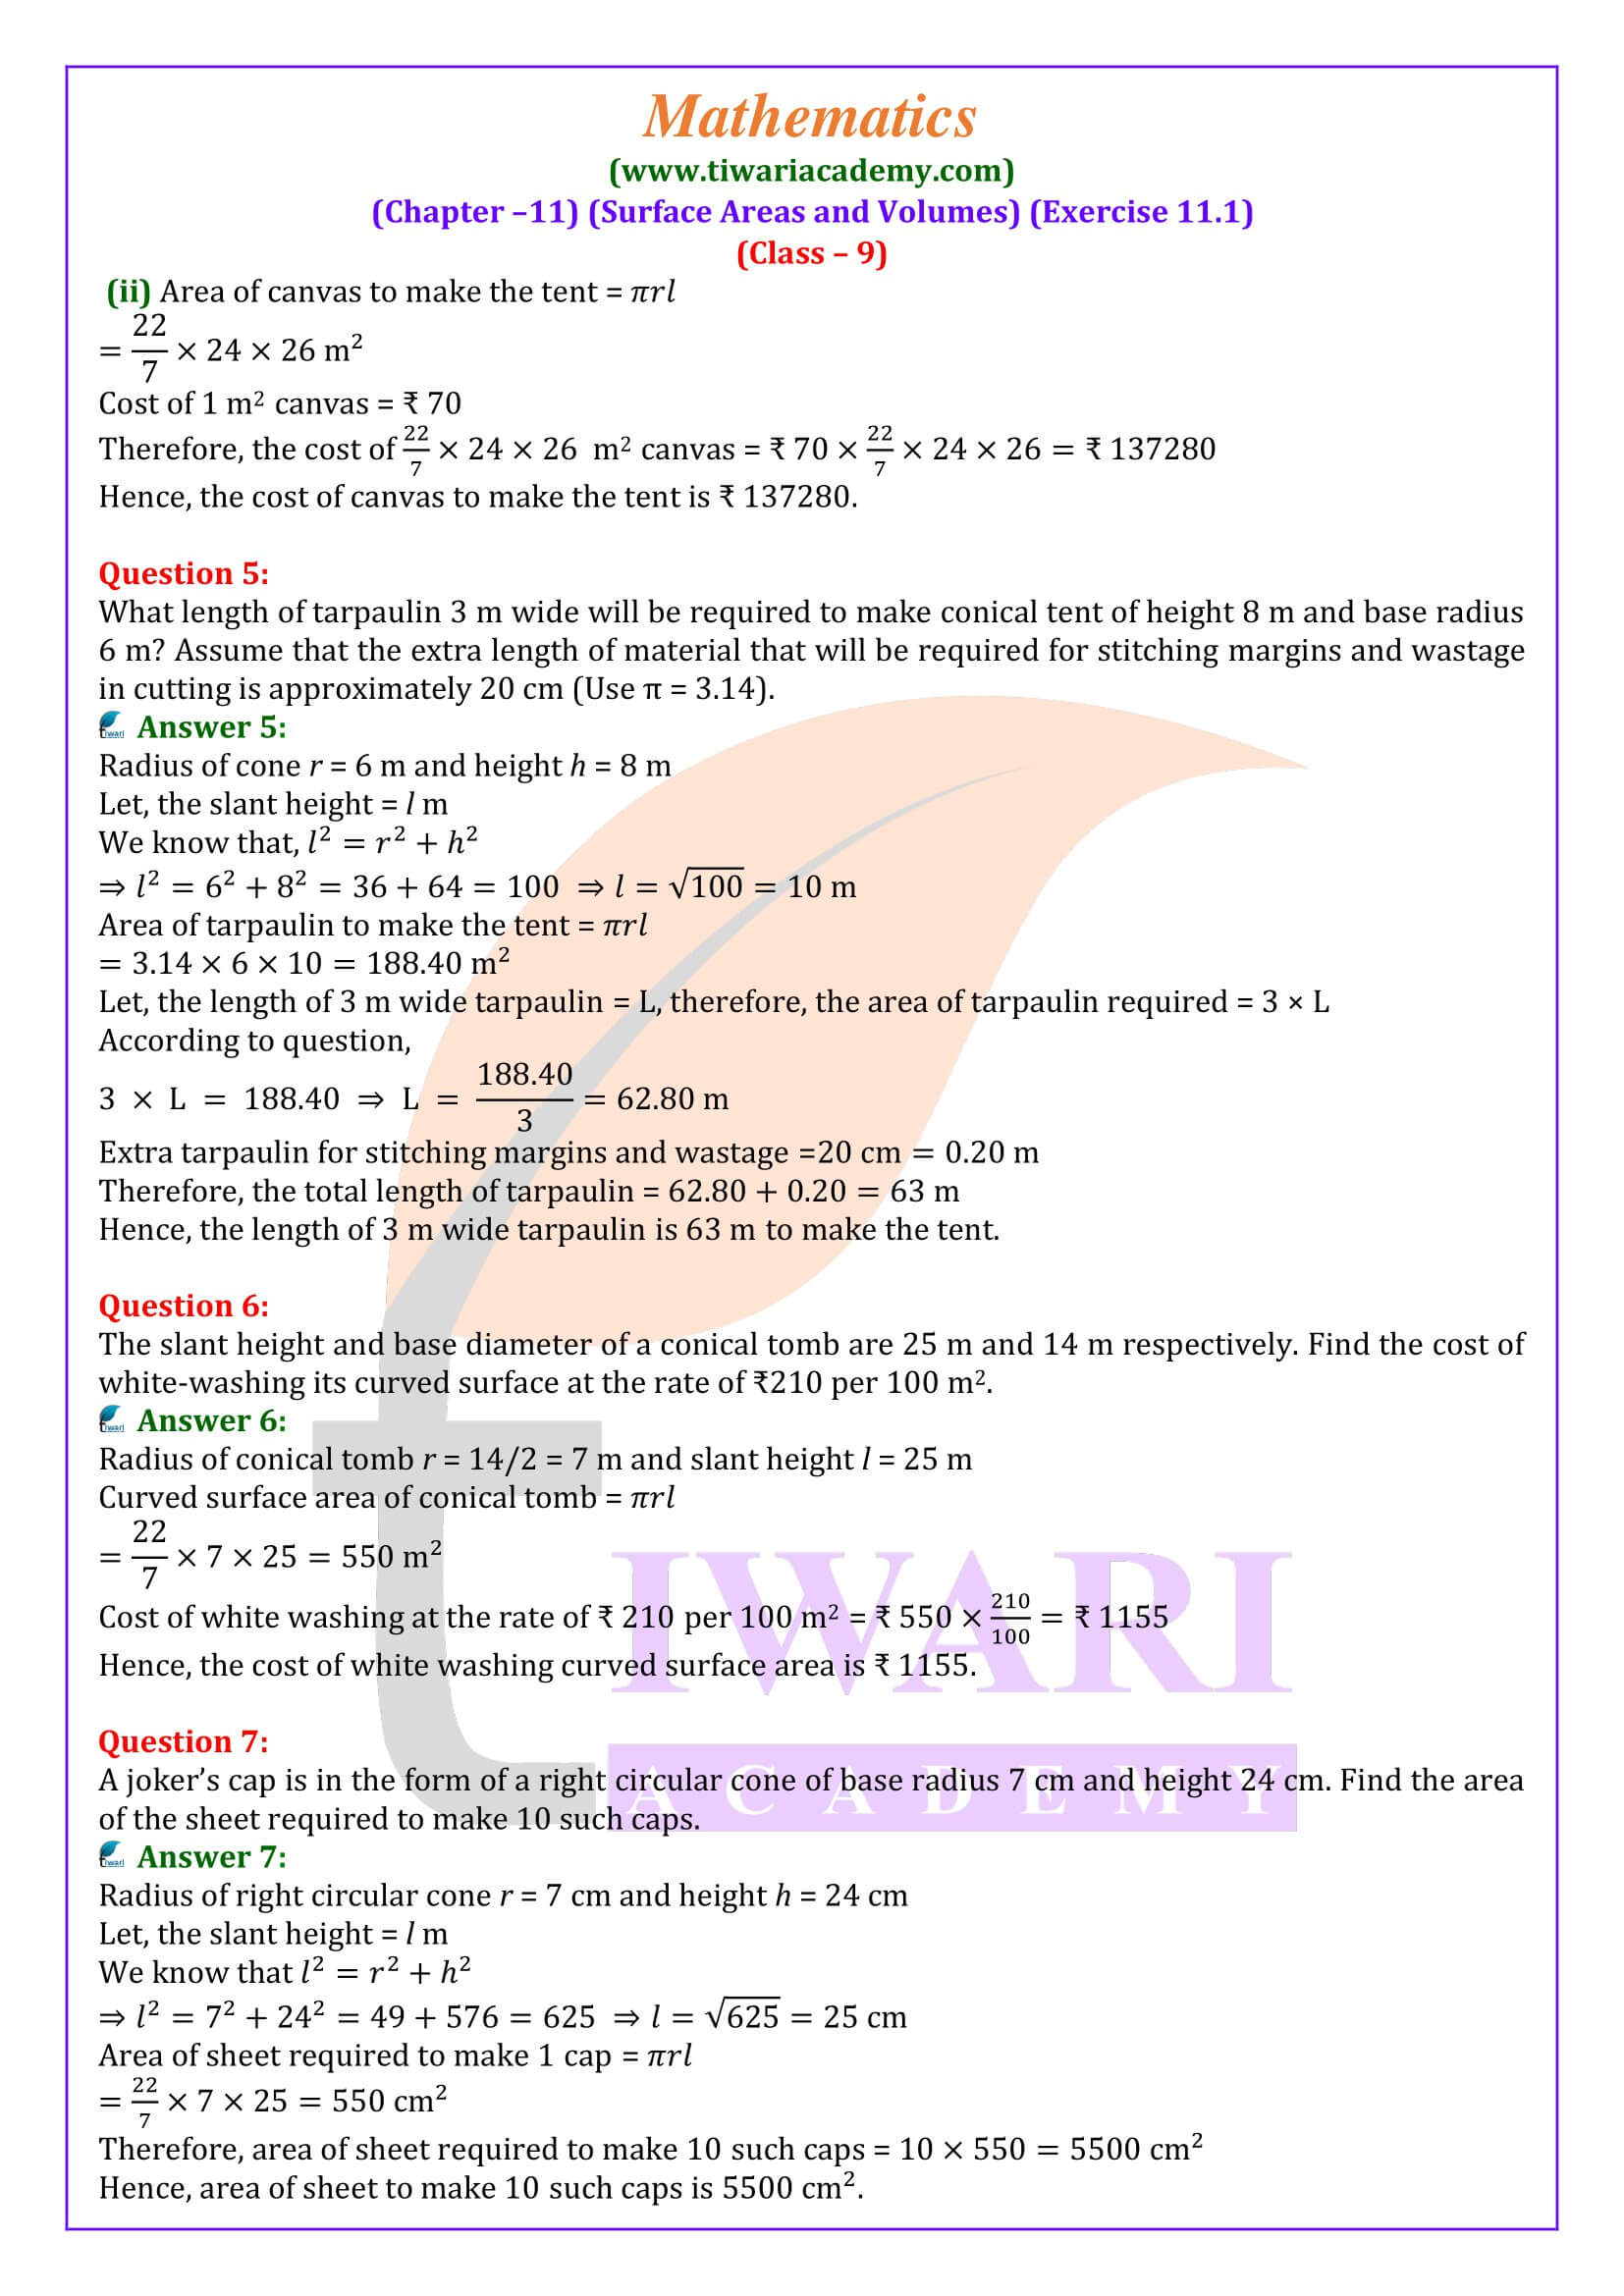 Class 9 Maths Exercise 11.1 solutions for new session